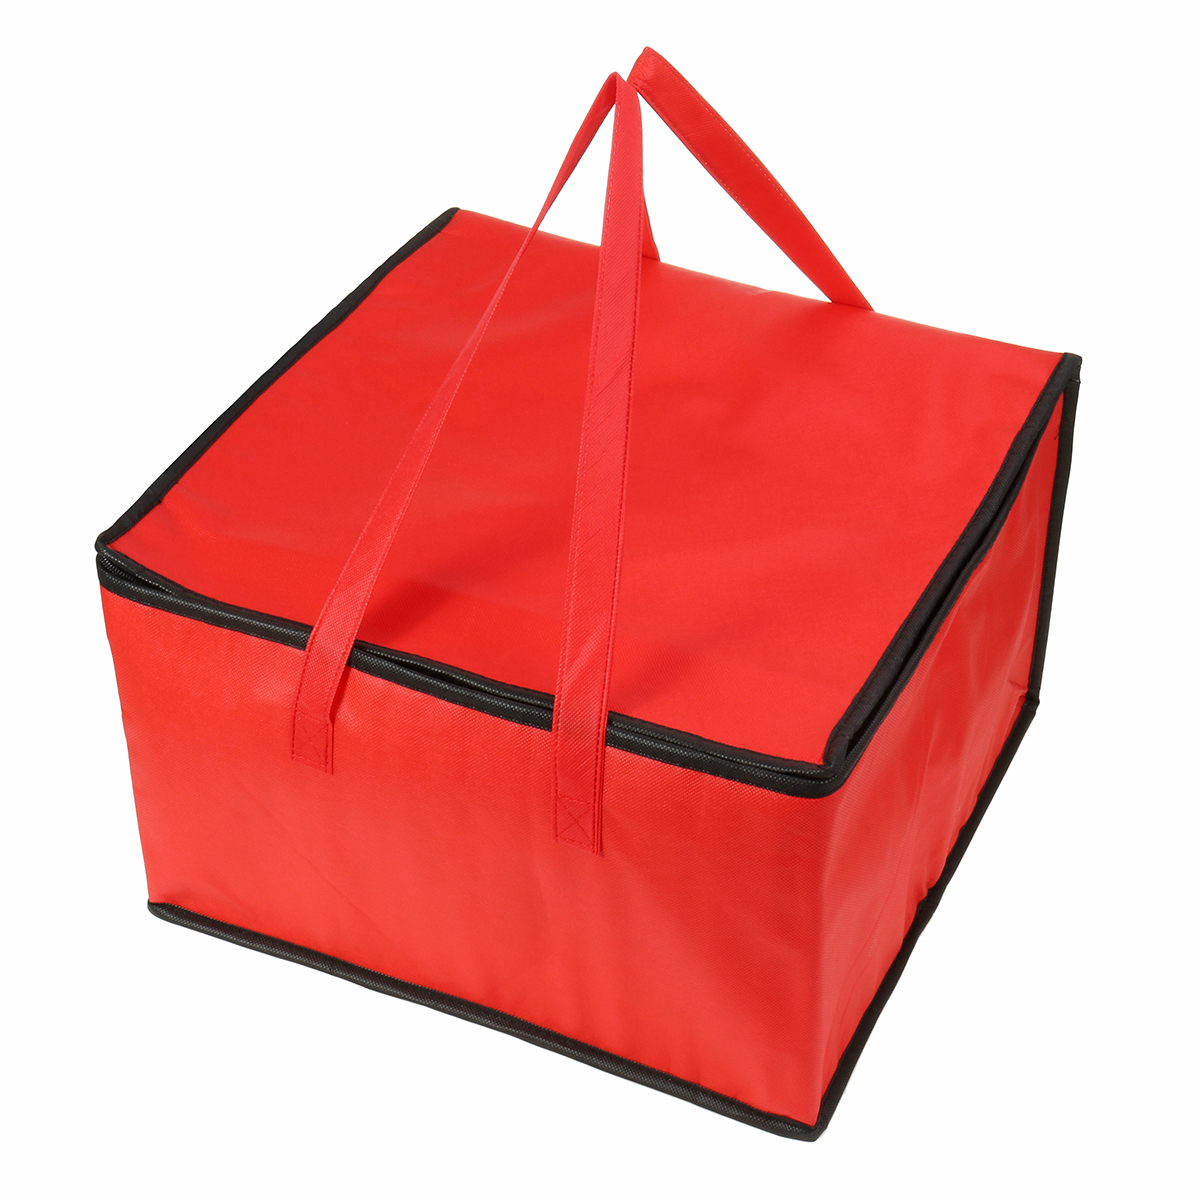 12inch-Picnic-Bag-Food-Insulated-Bag-Camping-BBQ-Lunch-Bag-Portable-Pizza-Food-Pizza-Delivery-Bag-1637132-5